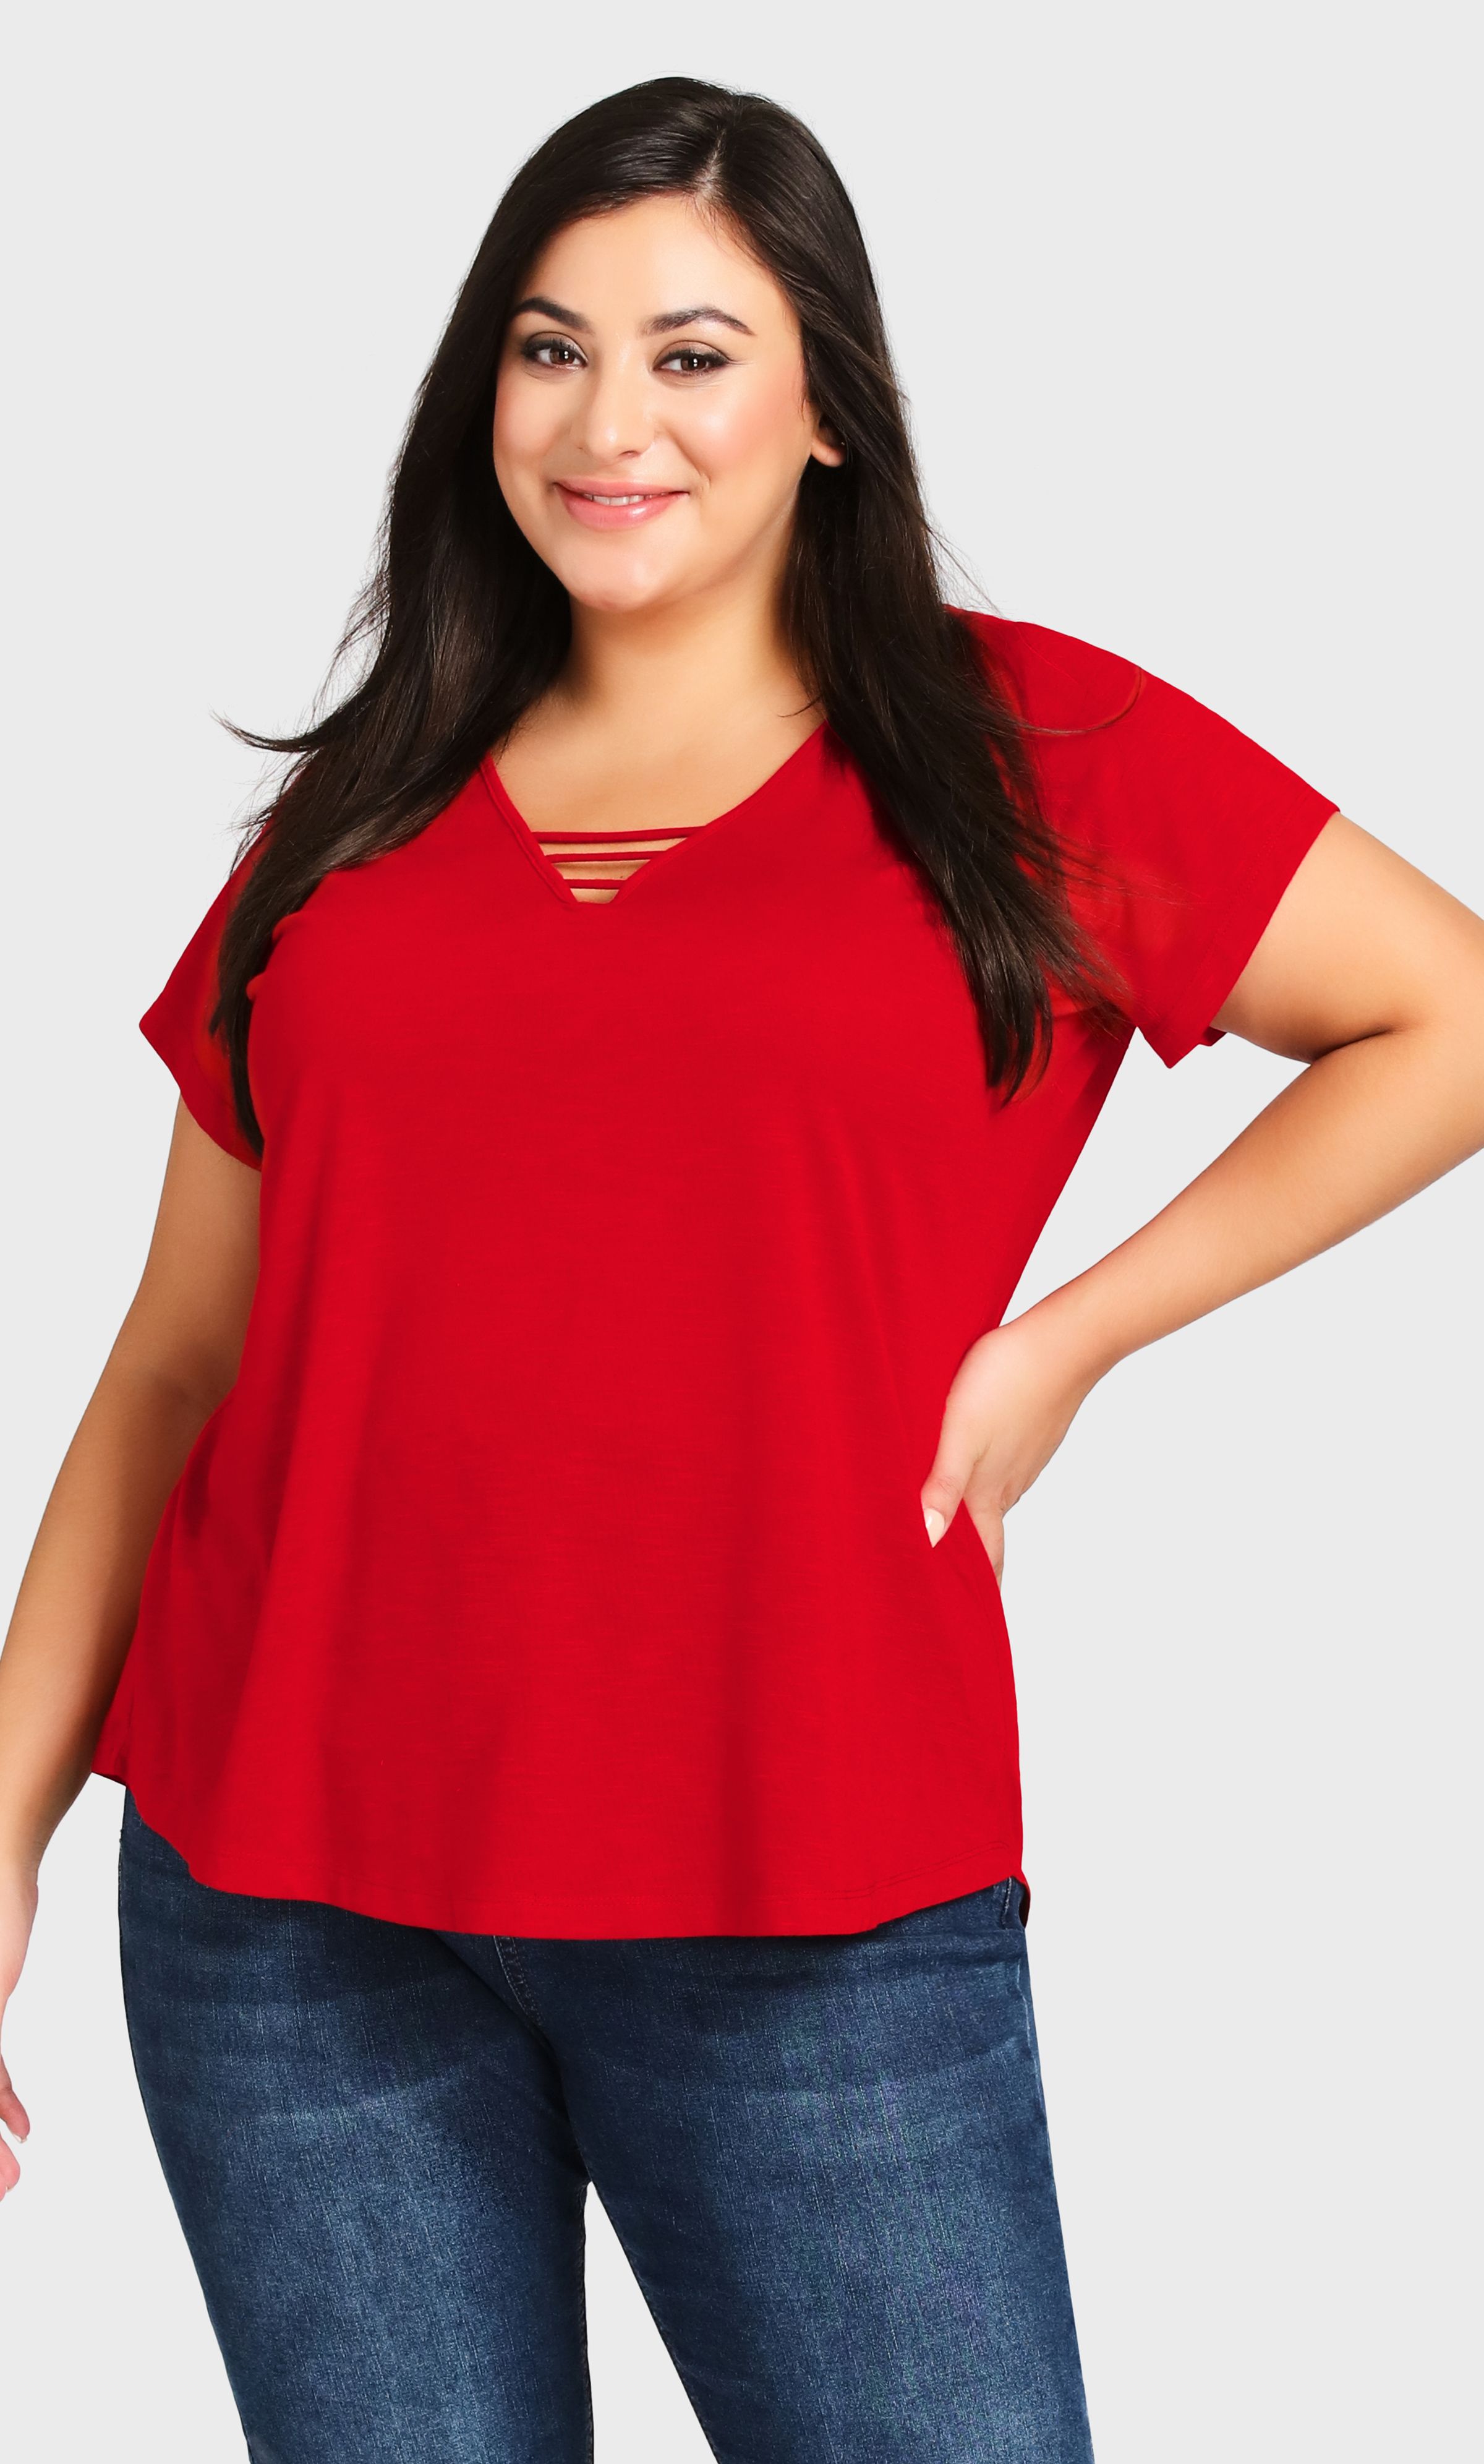 A bold take on a classic shape, the red 3 Bar V Neck Top is sure to make waves. The comfortable fabrication and easy everyday shape have an extra level of glamour from the feature neckline. Bright and exciting, you'll be glowing in this gorgeous top. Key Features Include: - V-neckline with strap detailing - Short sleeves - Pull-over fit - Stretch fabrication - Relaxed silhouette - Straight hemline at hips A pair of cuffed denim shorts are the perfect match for this top.